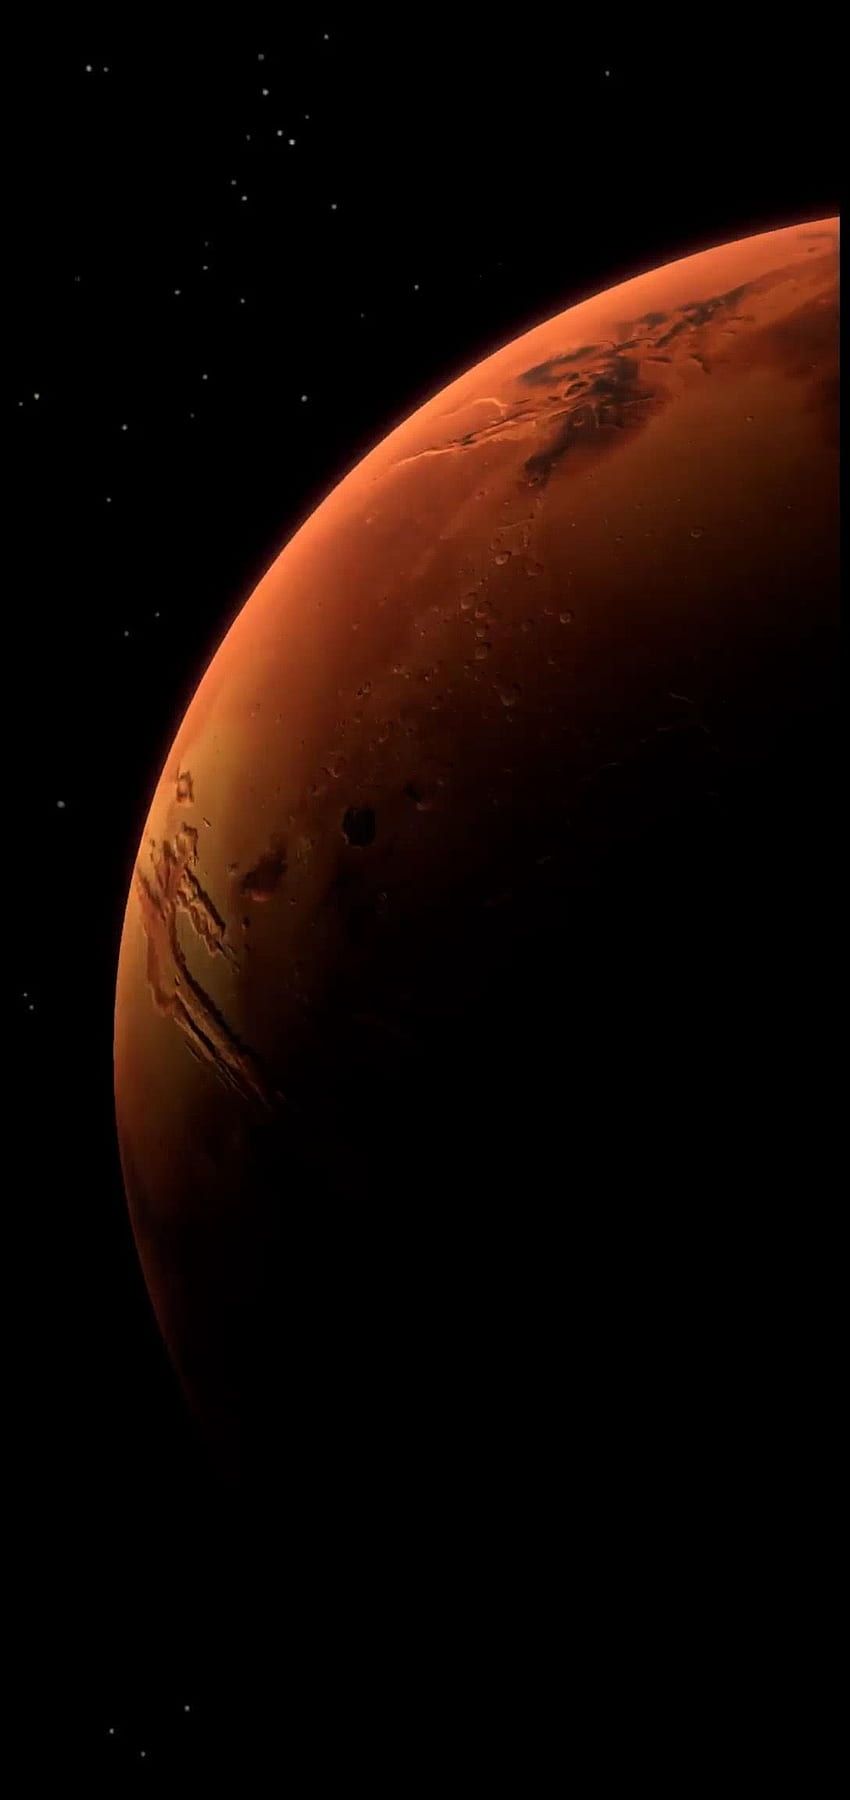 A red planet in space - Mars